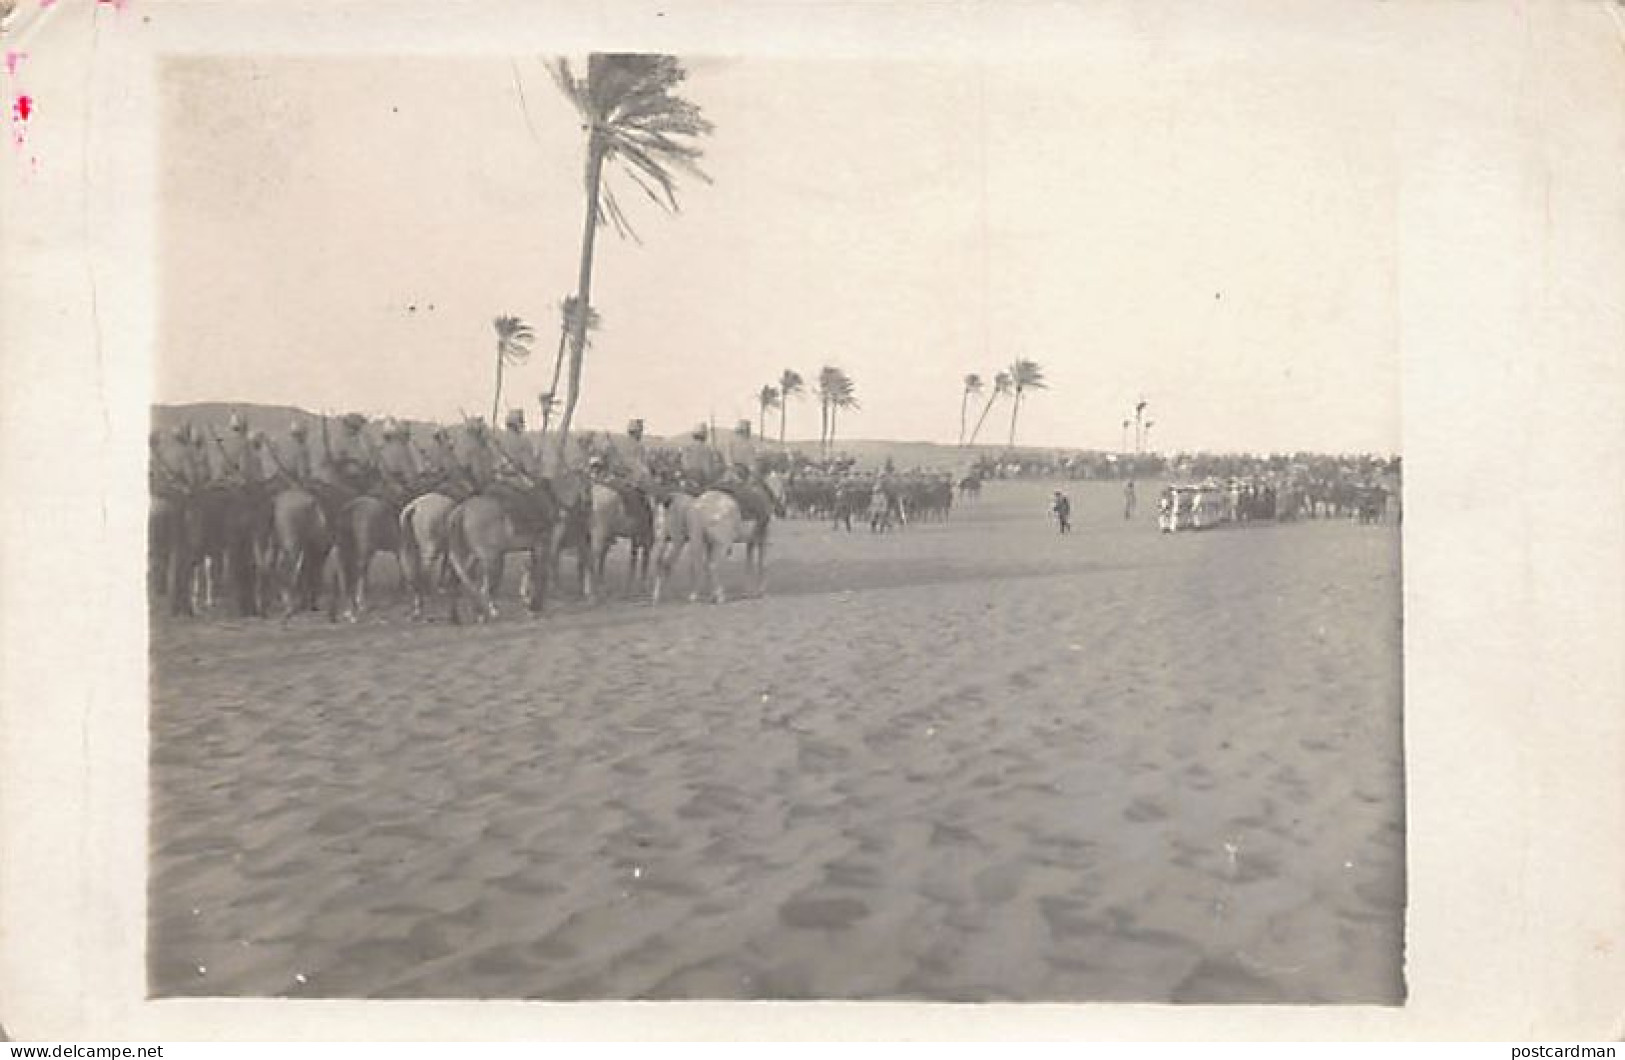 Egypt - ALEXANDRIA - Parade Of The French Chasseurs D'Afrique During World War One - REAL PHOTO - Publ. Unknown  - Alexandria